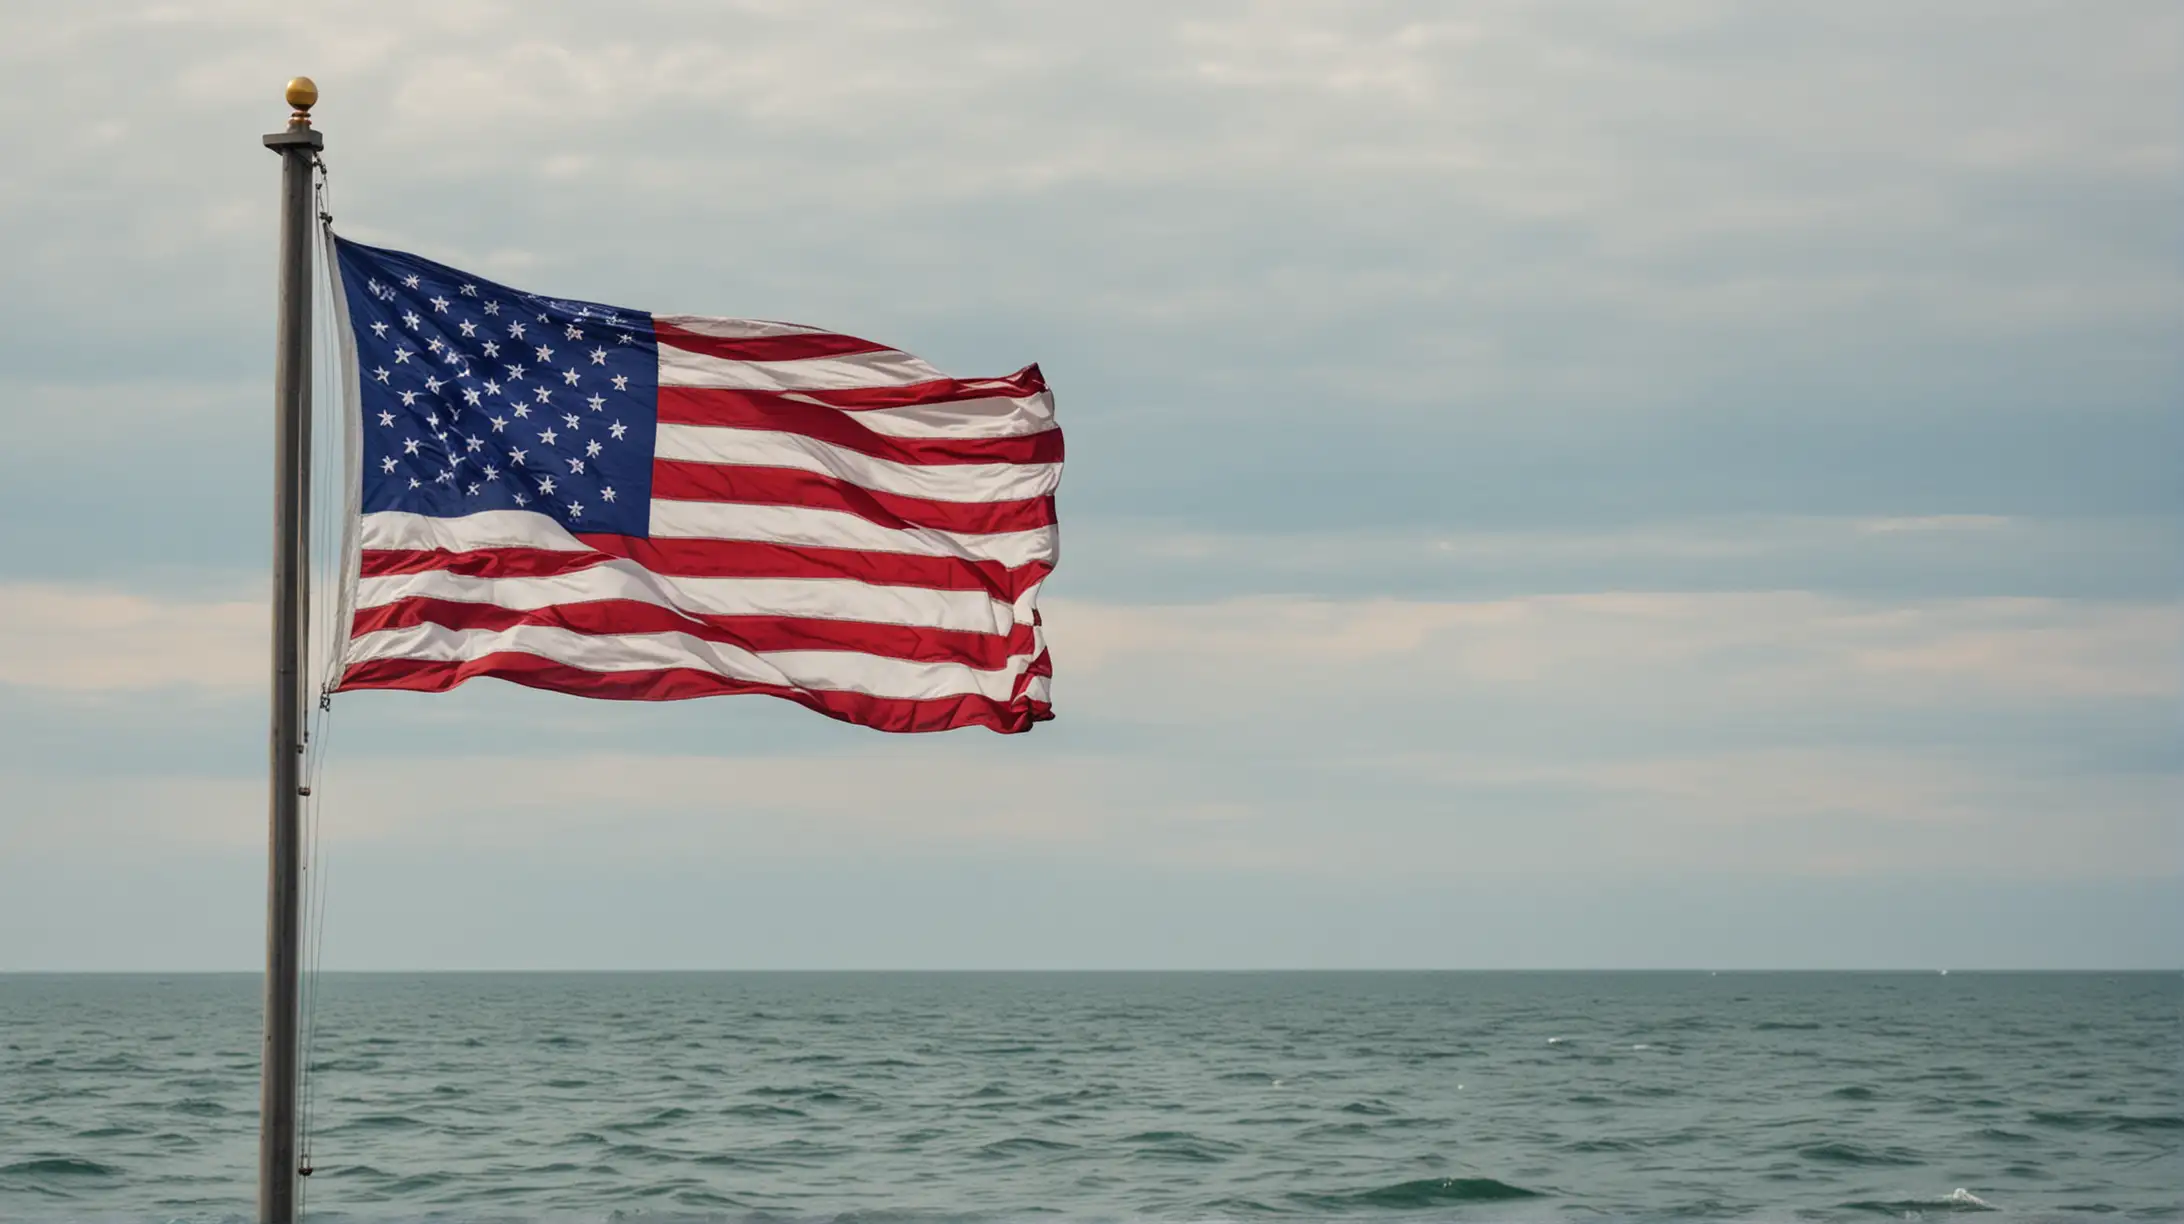 create a photo quality image of the american flag flying over the lake michigan